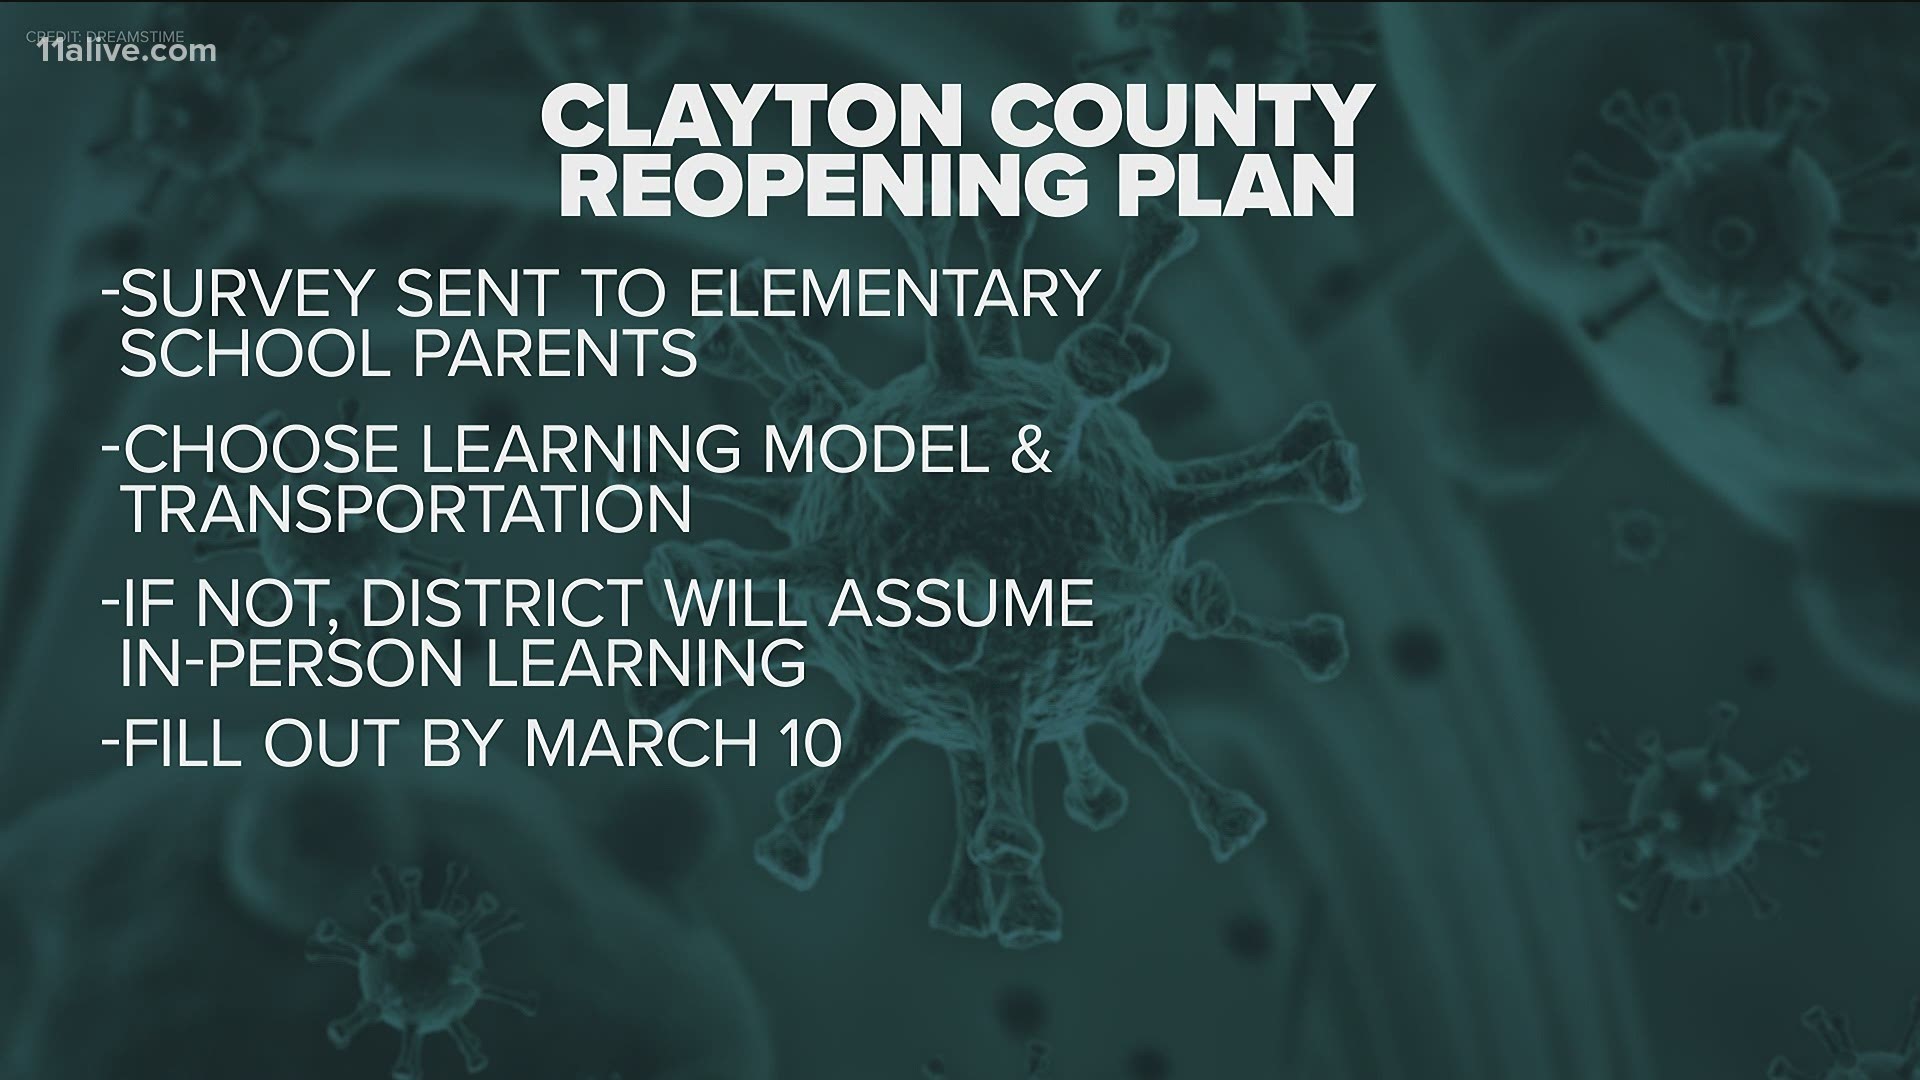 The district announced the plans Tuesday afternoon.